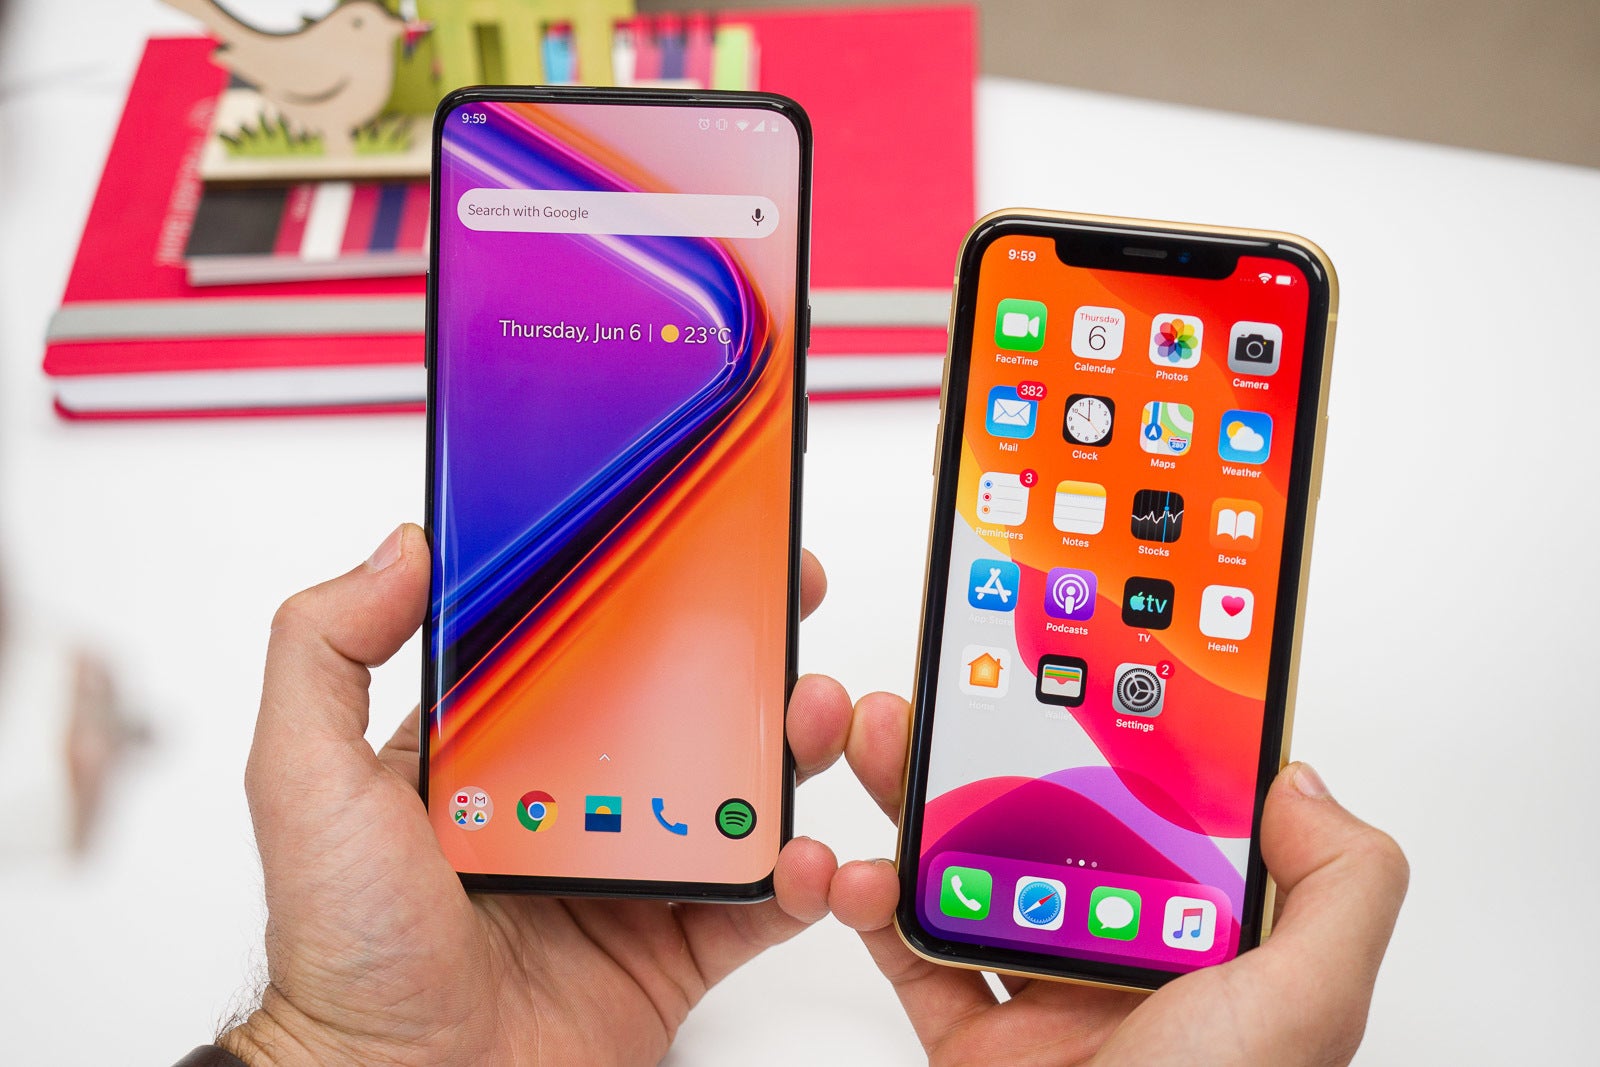 OnePlus 7 Pro with its AMOLED screen on the left, iPhone XR with an LCD screen on the right - Is the OnePlus 7 Pro display hurting your eyes? You're not the only one (but there is a fix!)